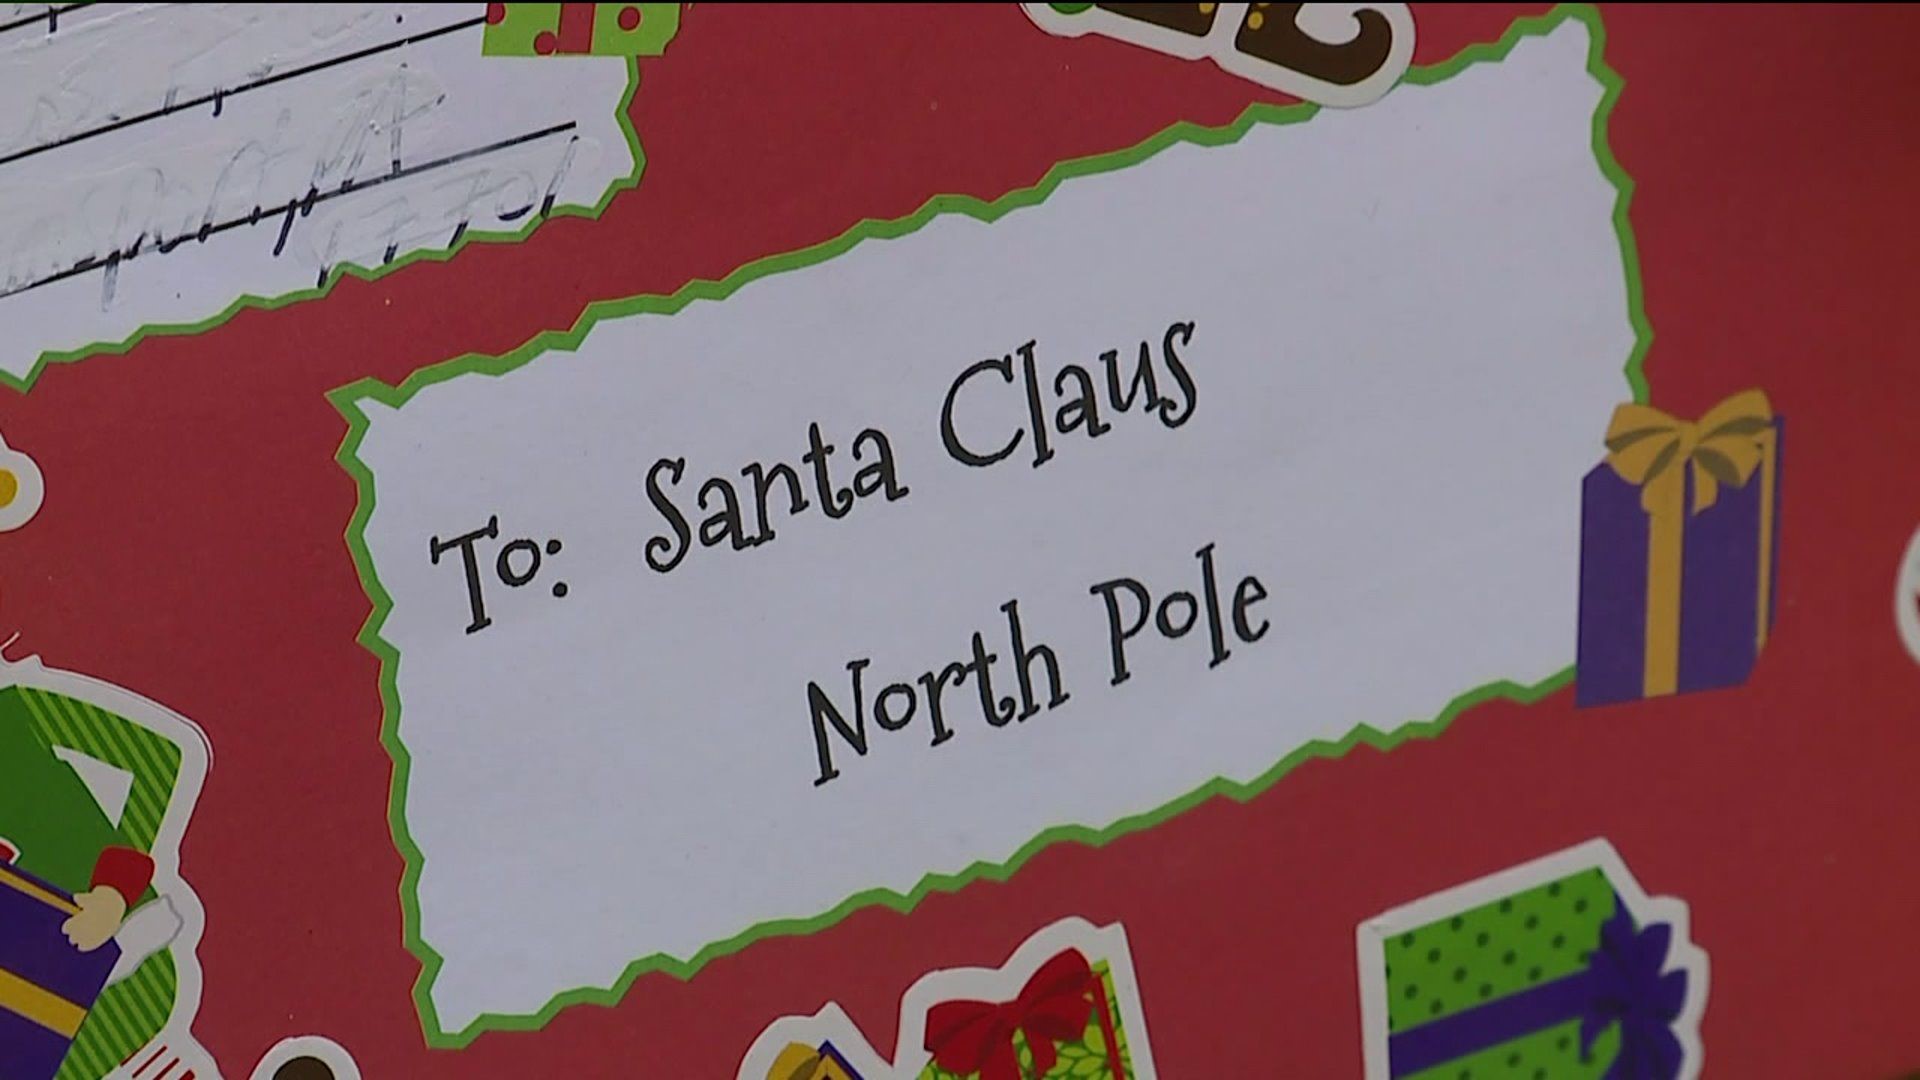 Post Office Helps Sort Letters to North Pole